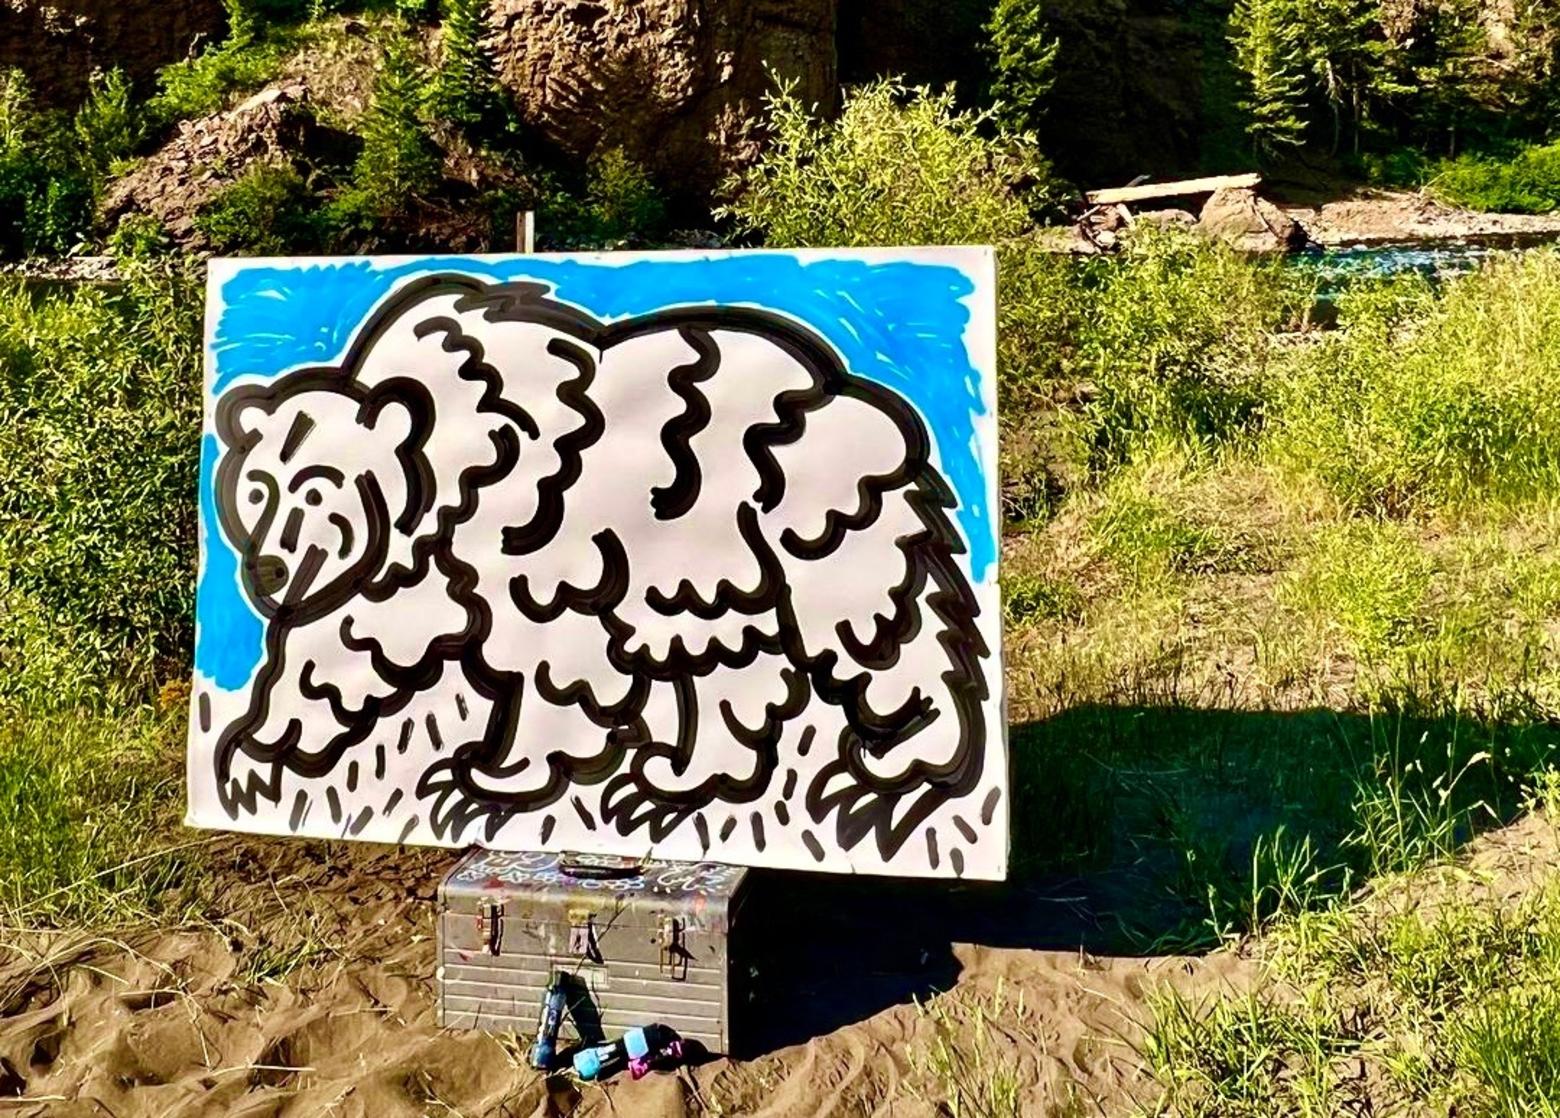 When encountering Yellowstone grizzlies like this bruin created by artist Eric Junker in the national park, viewers navigating the urban jungle will have nothing to fear and plenty of inspiration to divine. Photo courtesy Eric Junker 